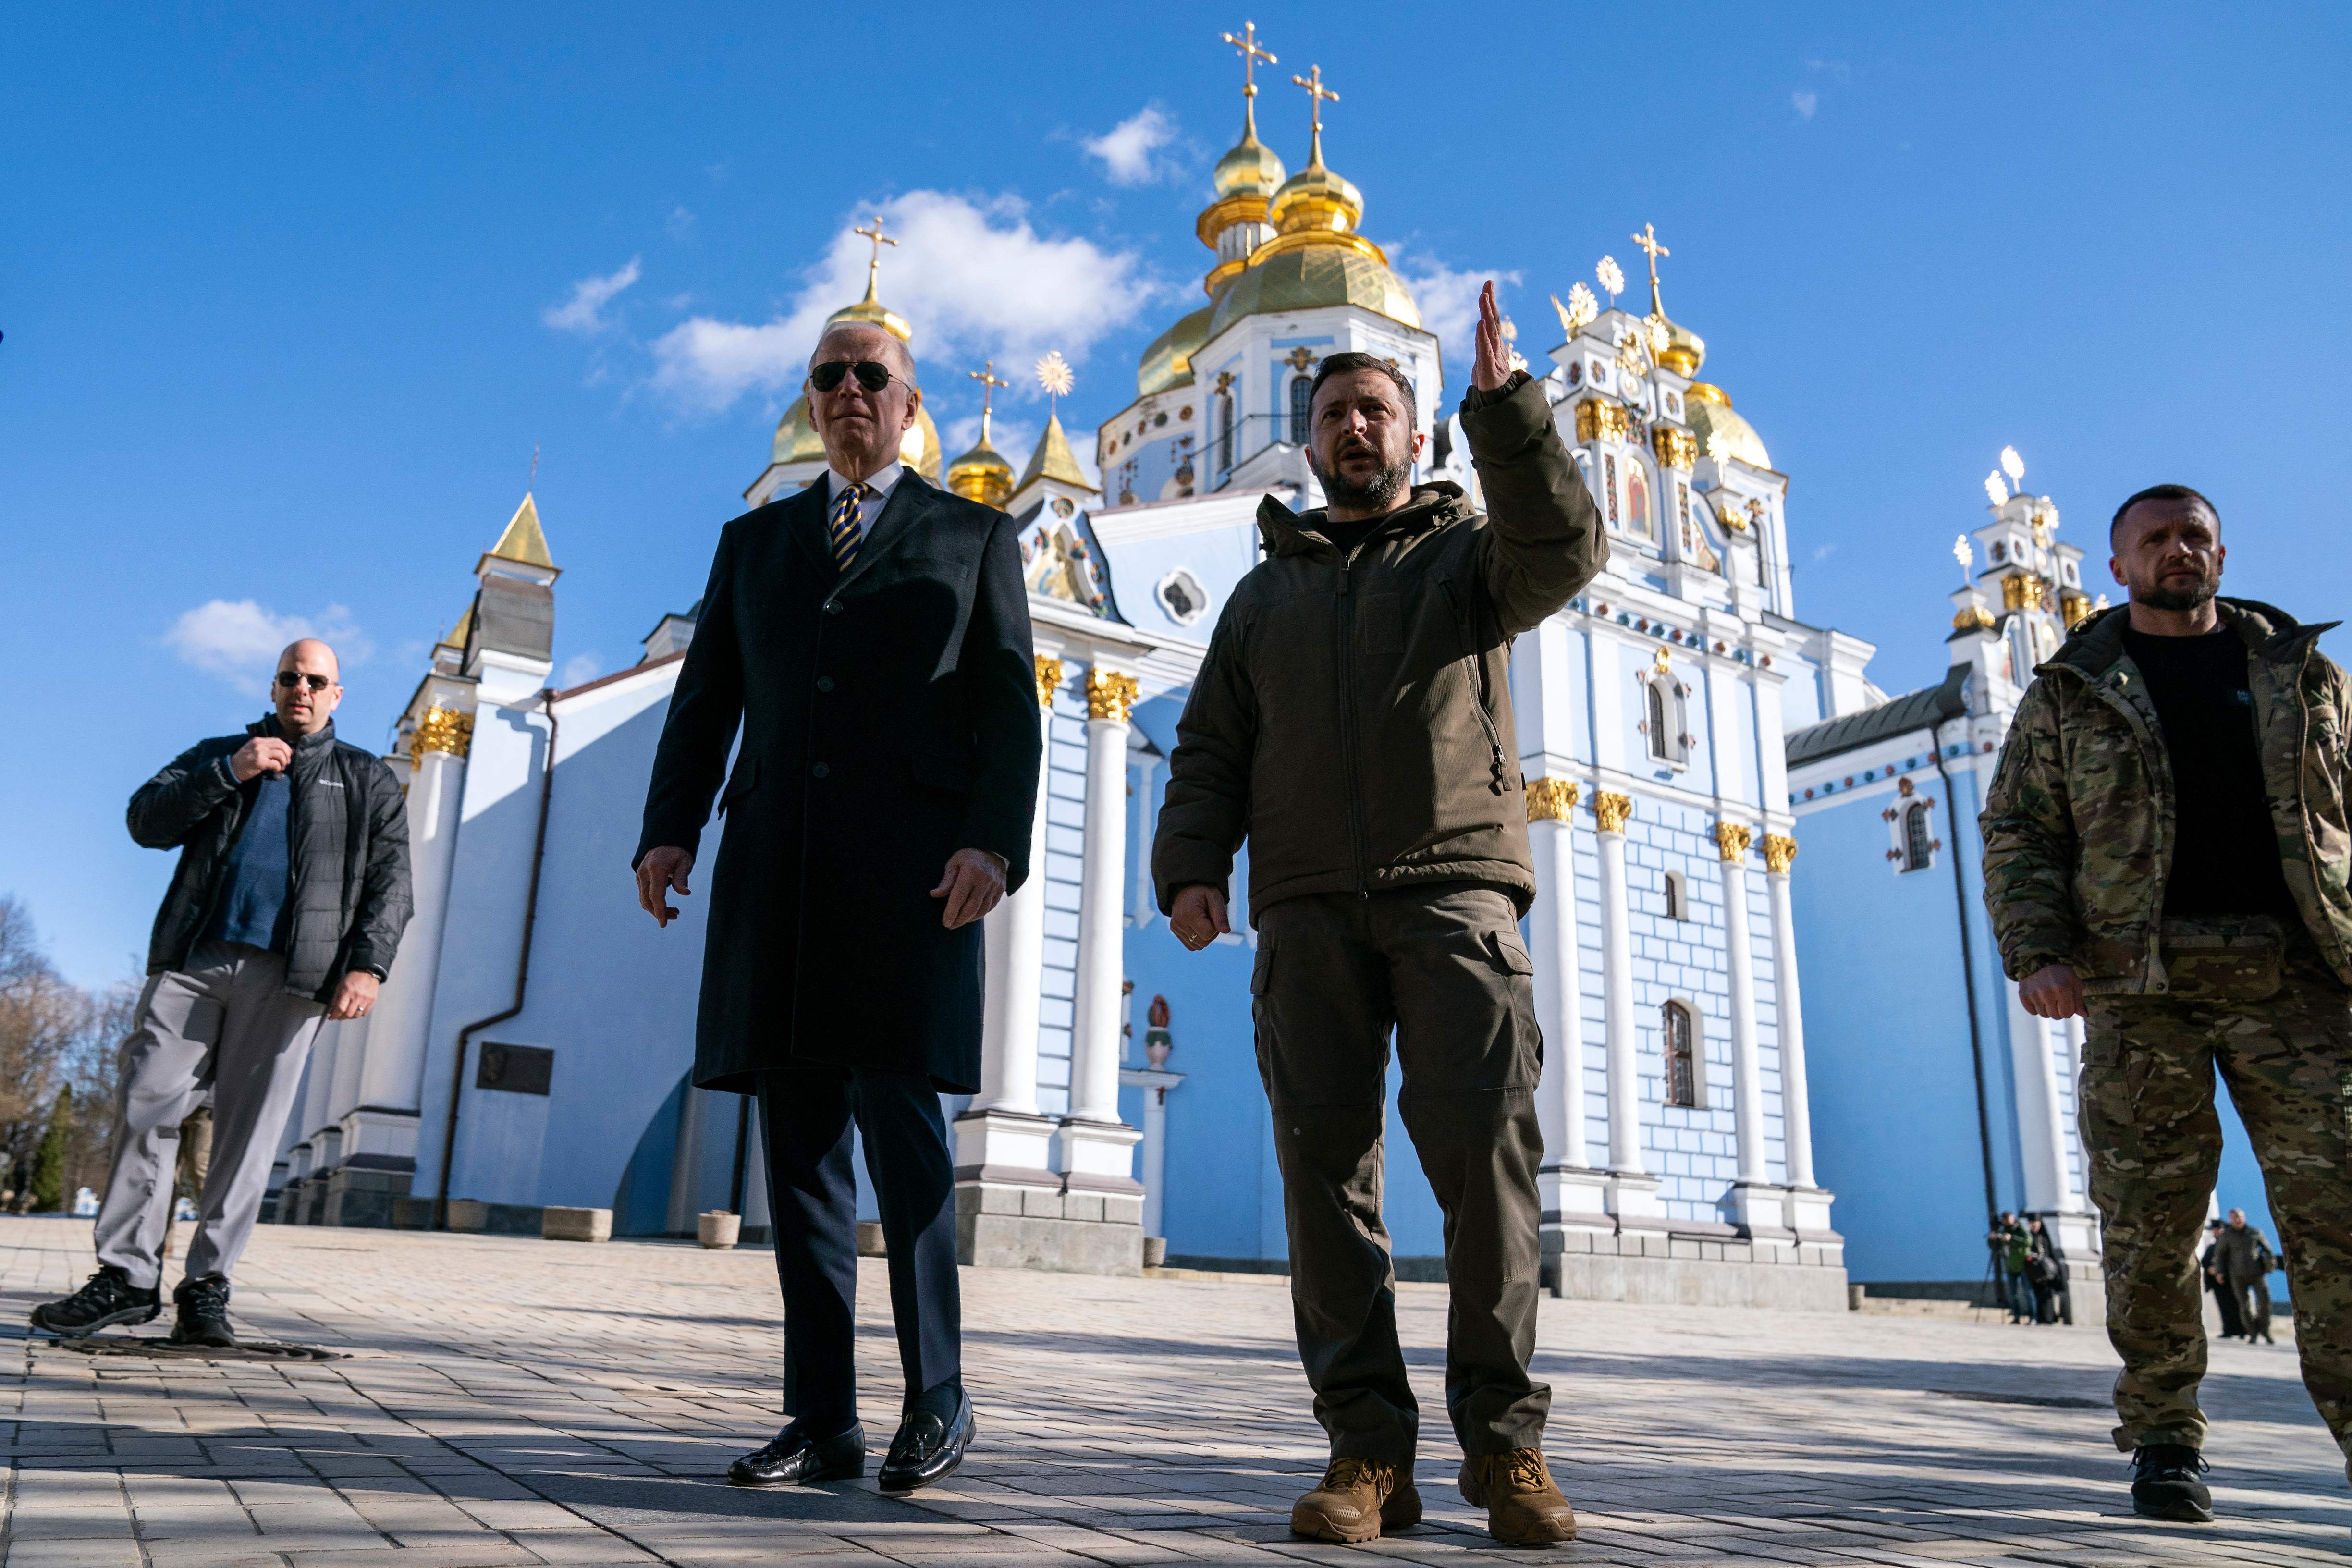 US President Joe Biden walks with Ukrainian President Volodymyr Zelensky at St. Michael's Golden-Domed Cathedral during an unannounced visit, in Kyiv